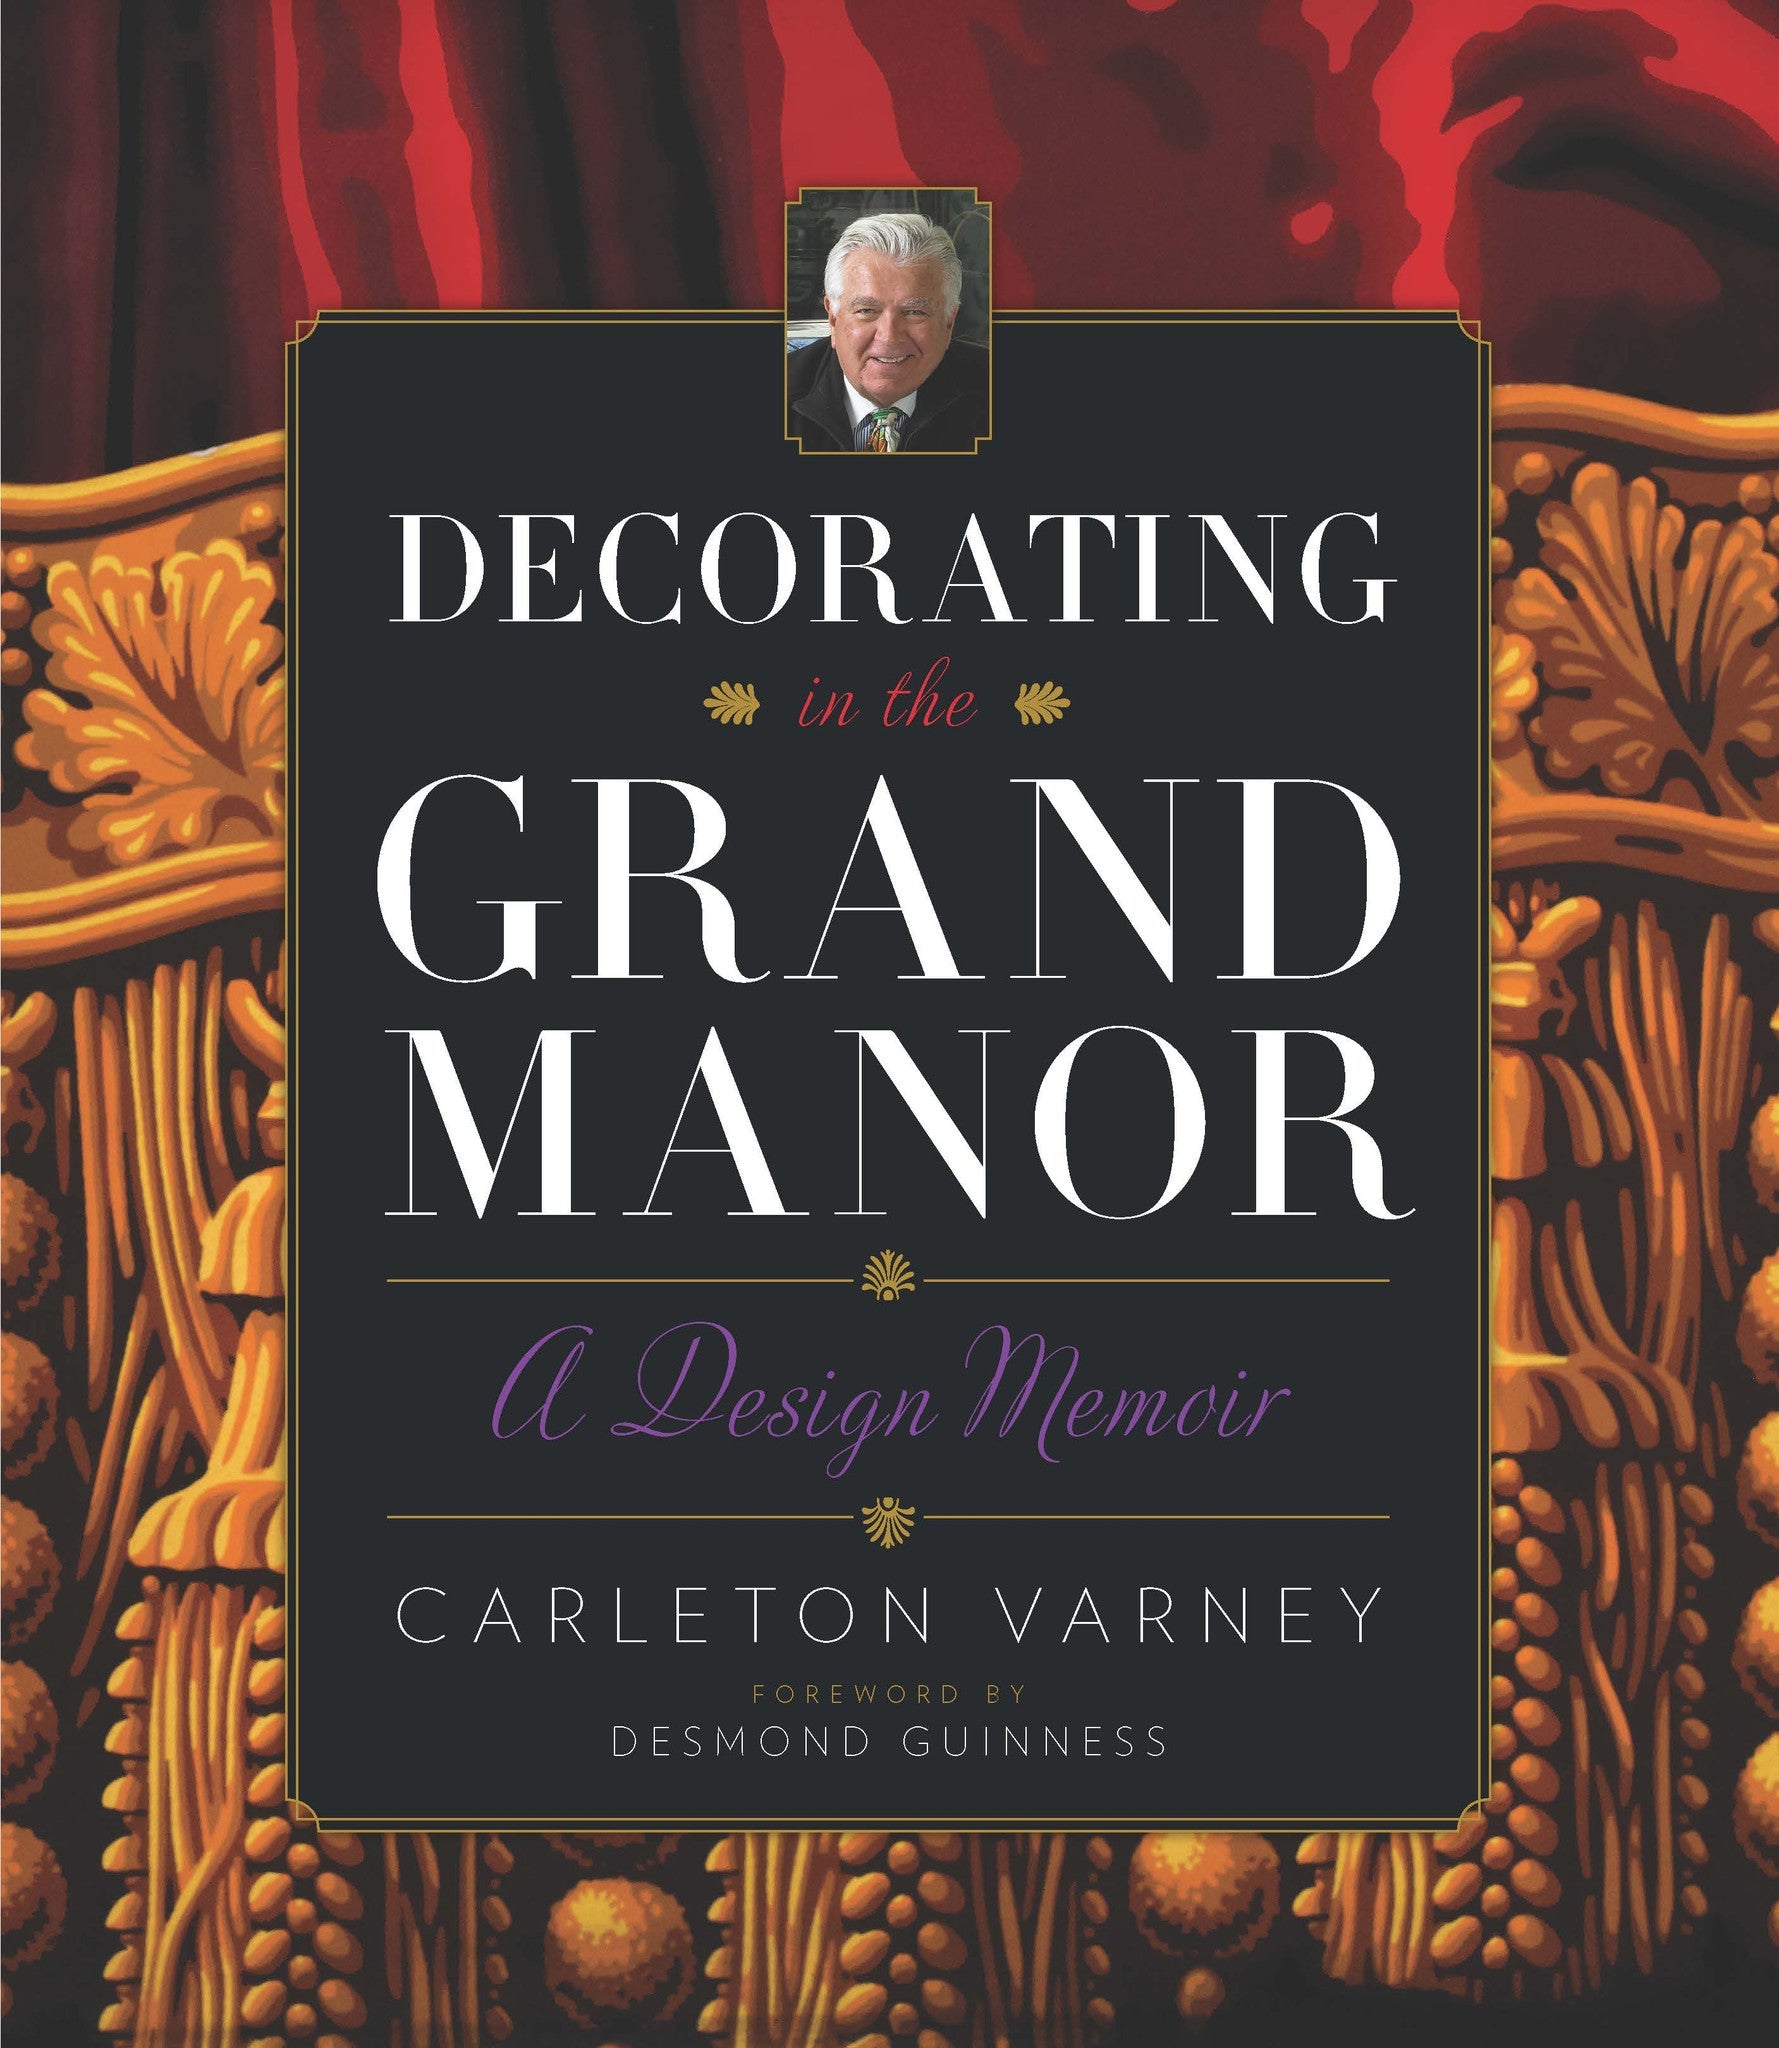 Decorating In The Grand Manor by Carleton Varney